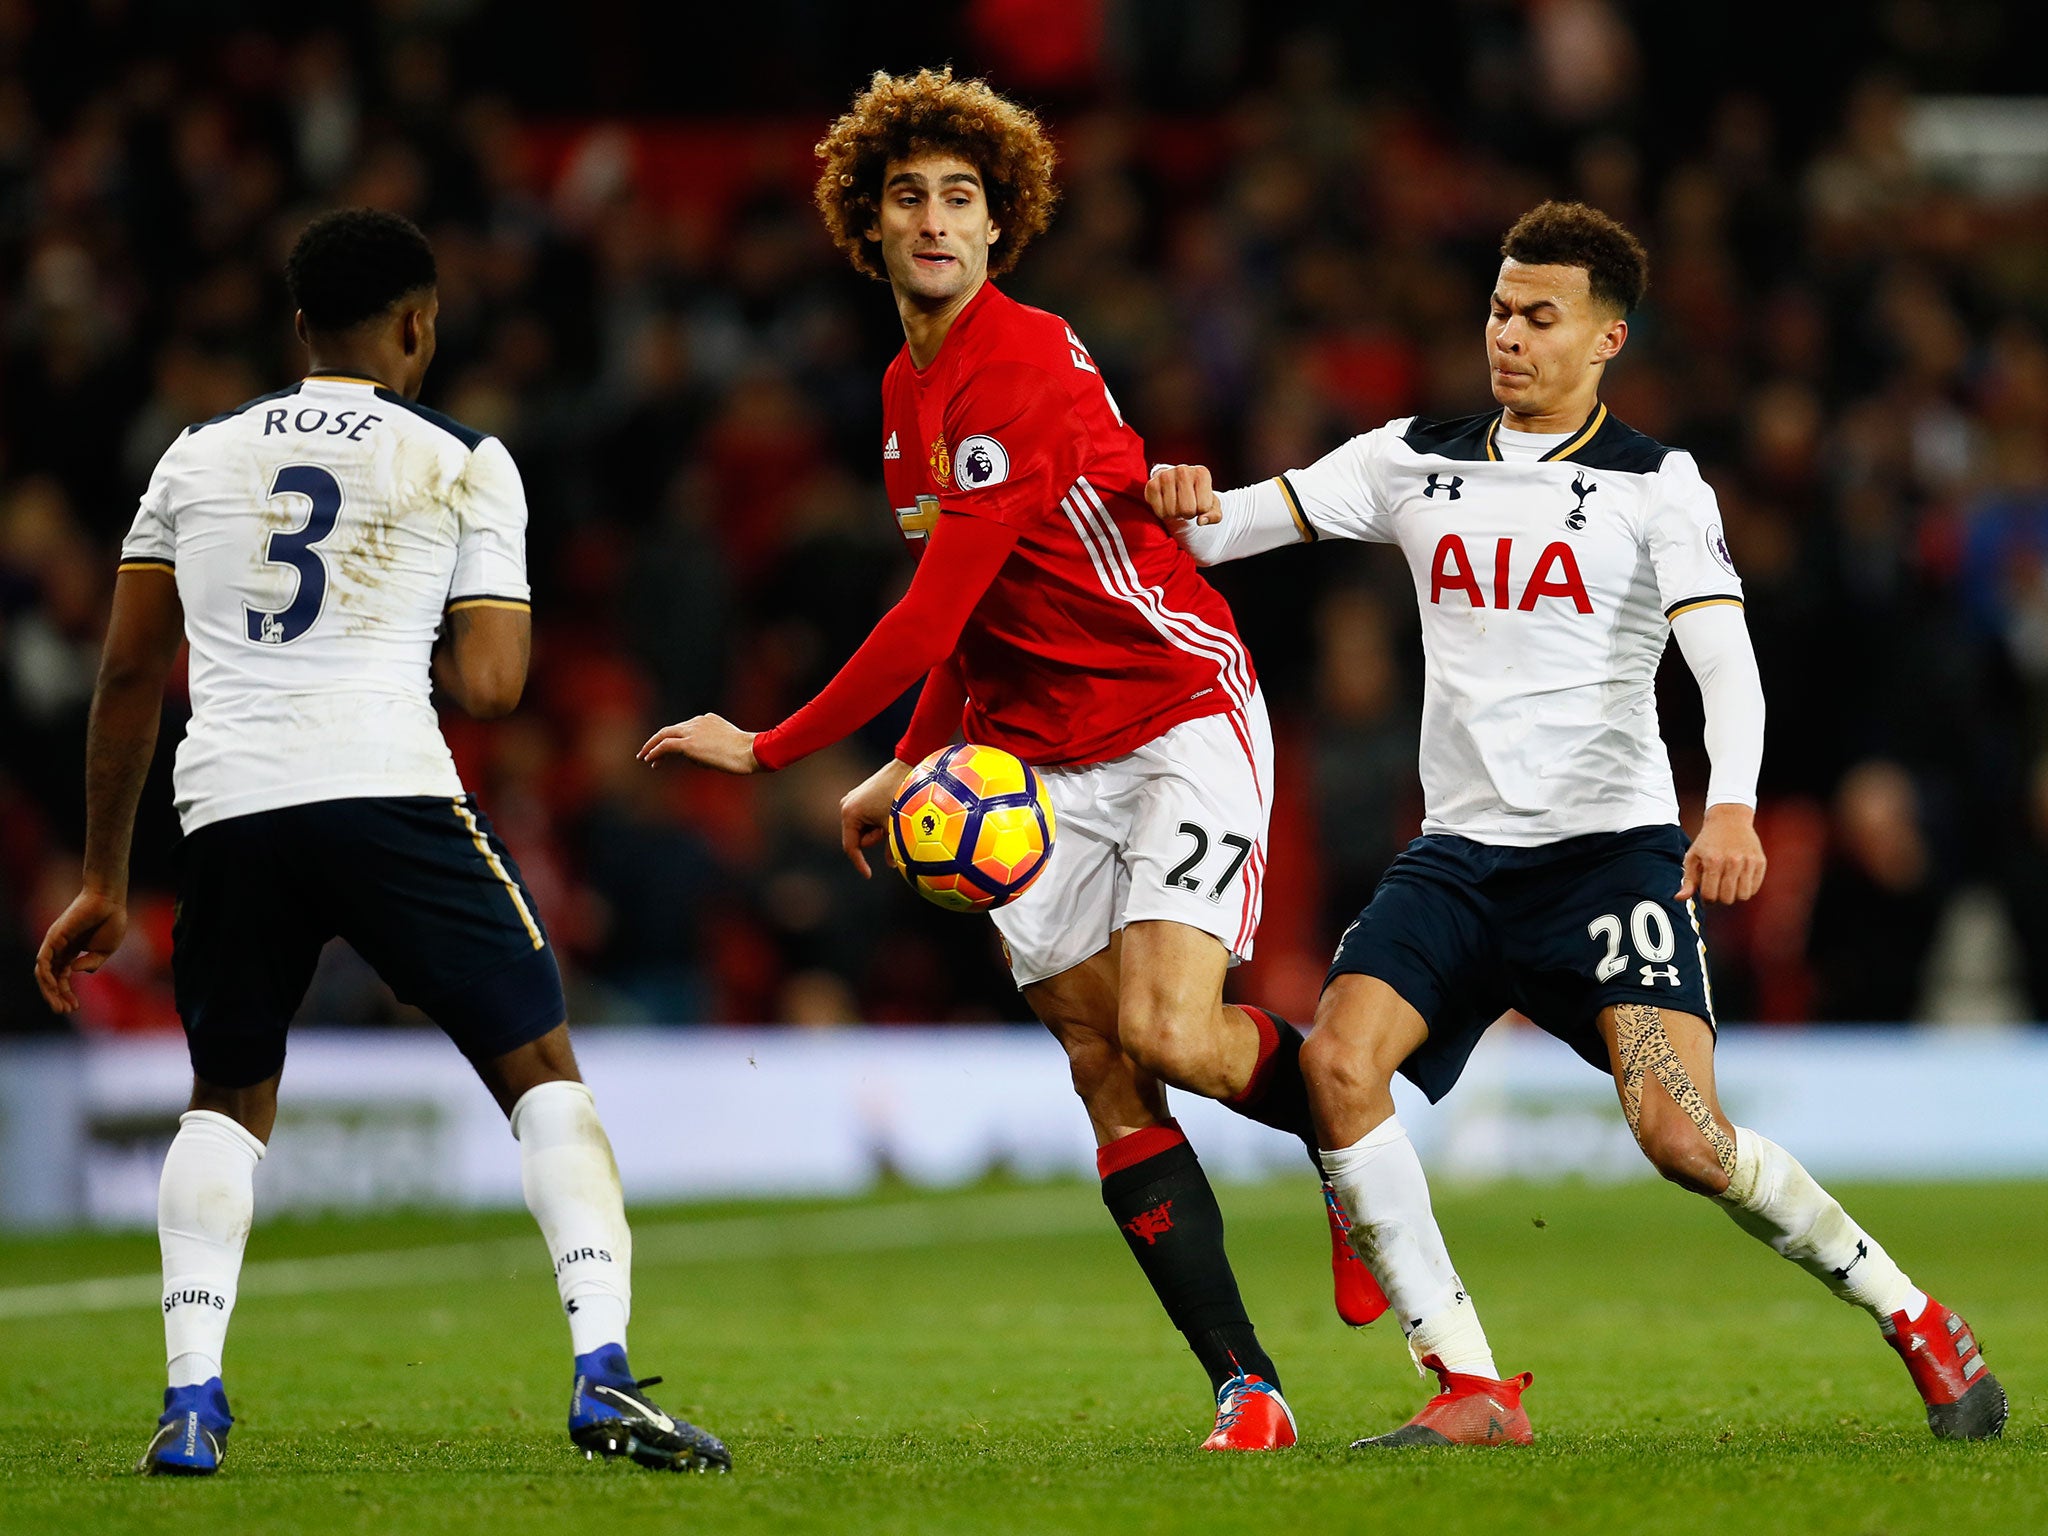 Marouane Fellaini made another appearance as a substitute but managed to avoid conceding a penalty this week